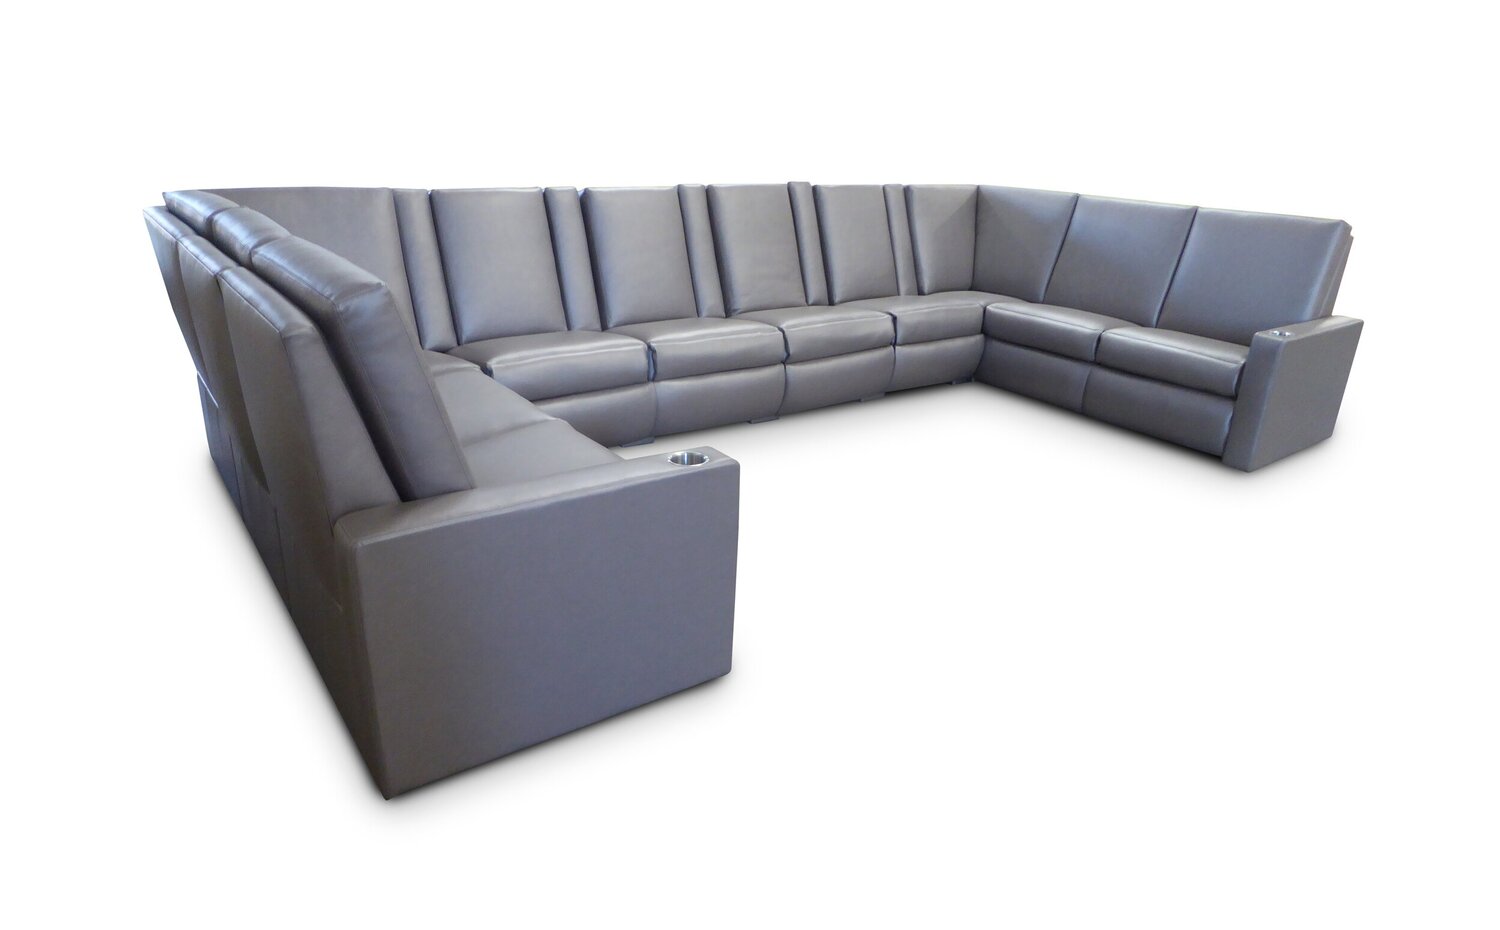 Fortress Seating Bel Aire